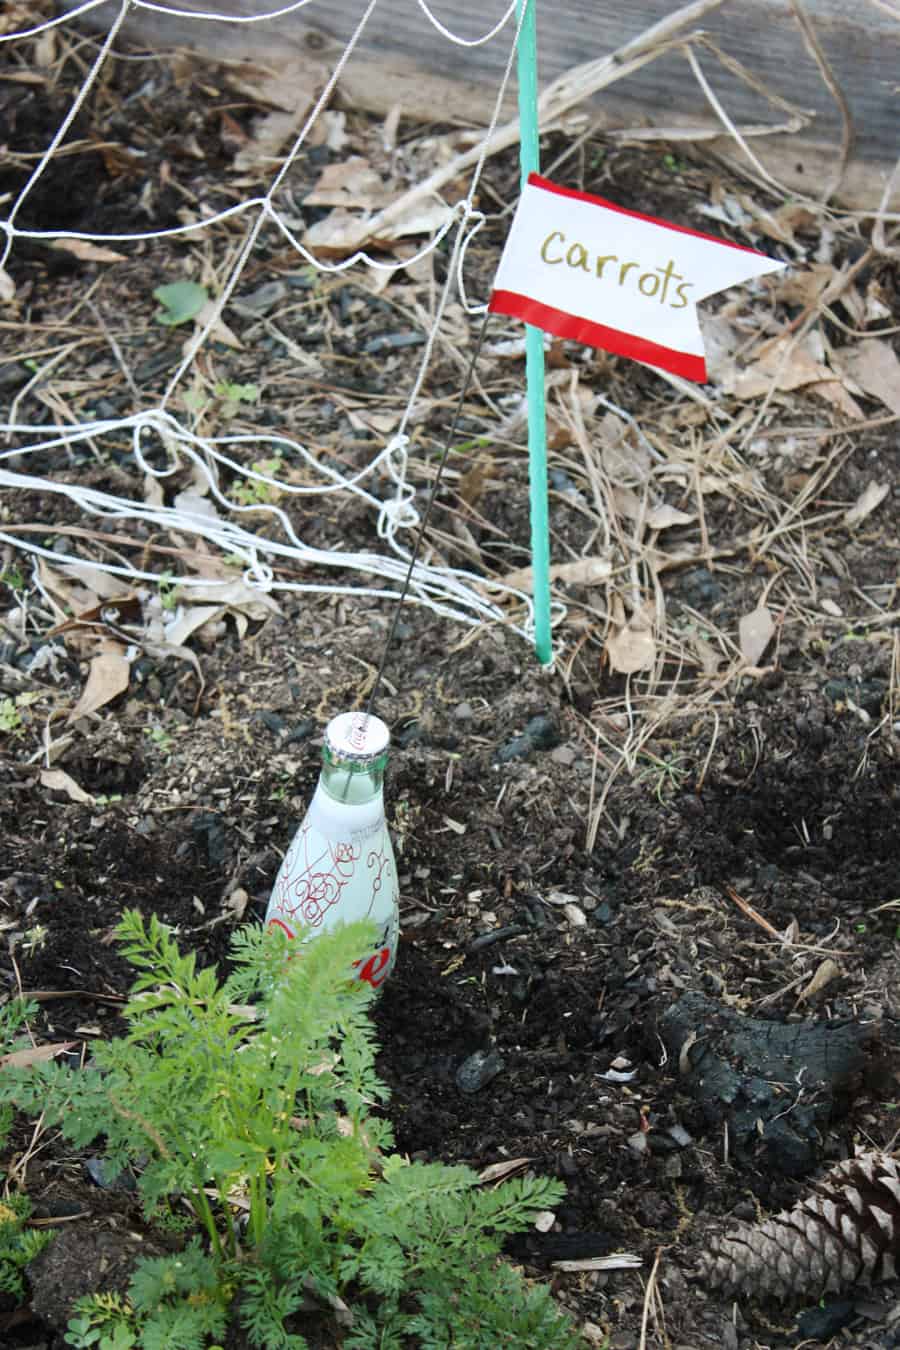 DIY garden plant markers: an easy way to recycle glass bottles and add more color to your yard! | via Autumn All Along